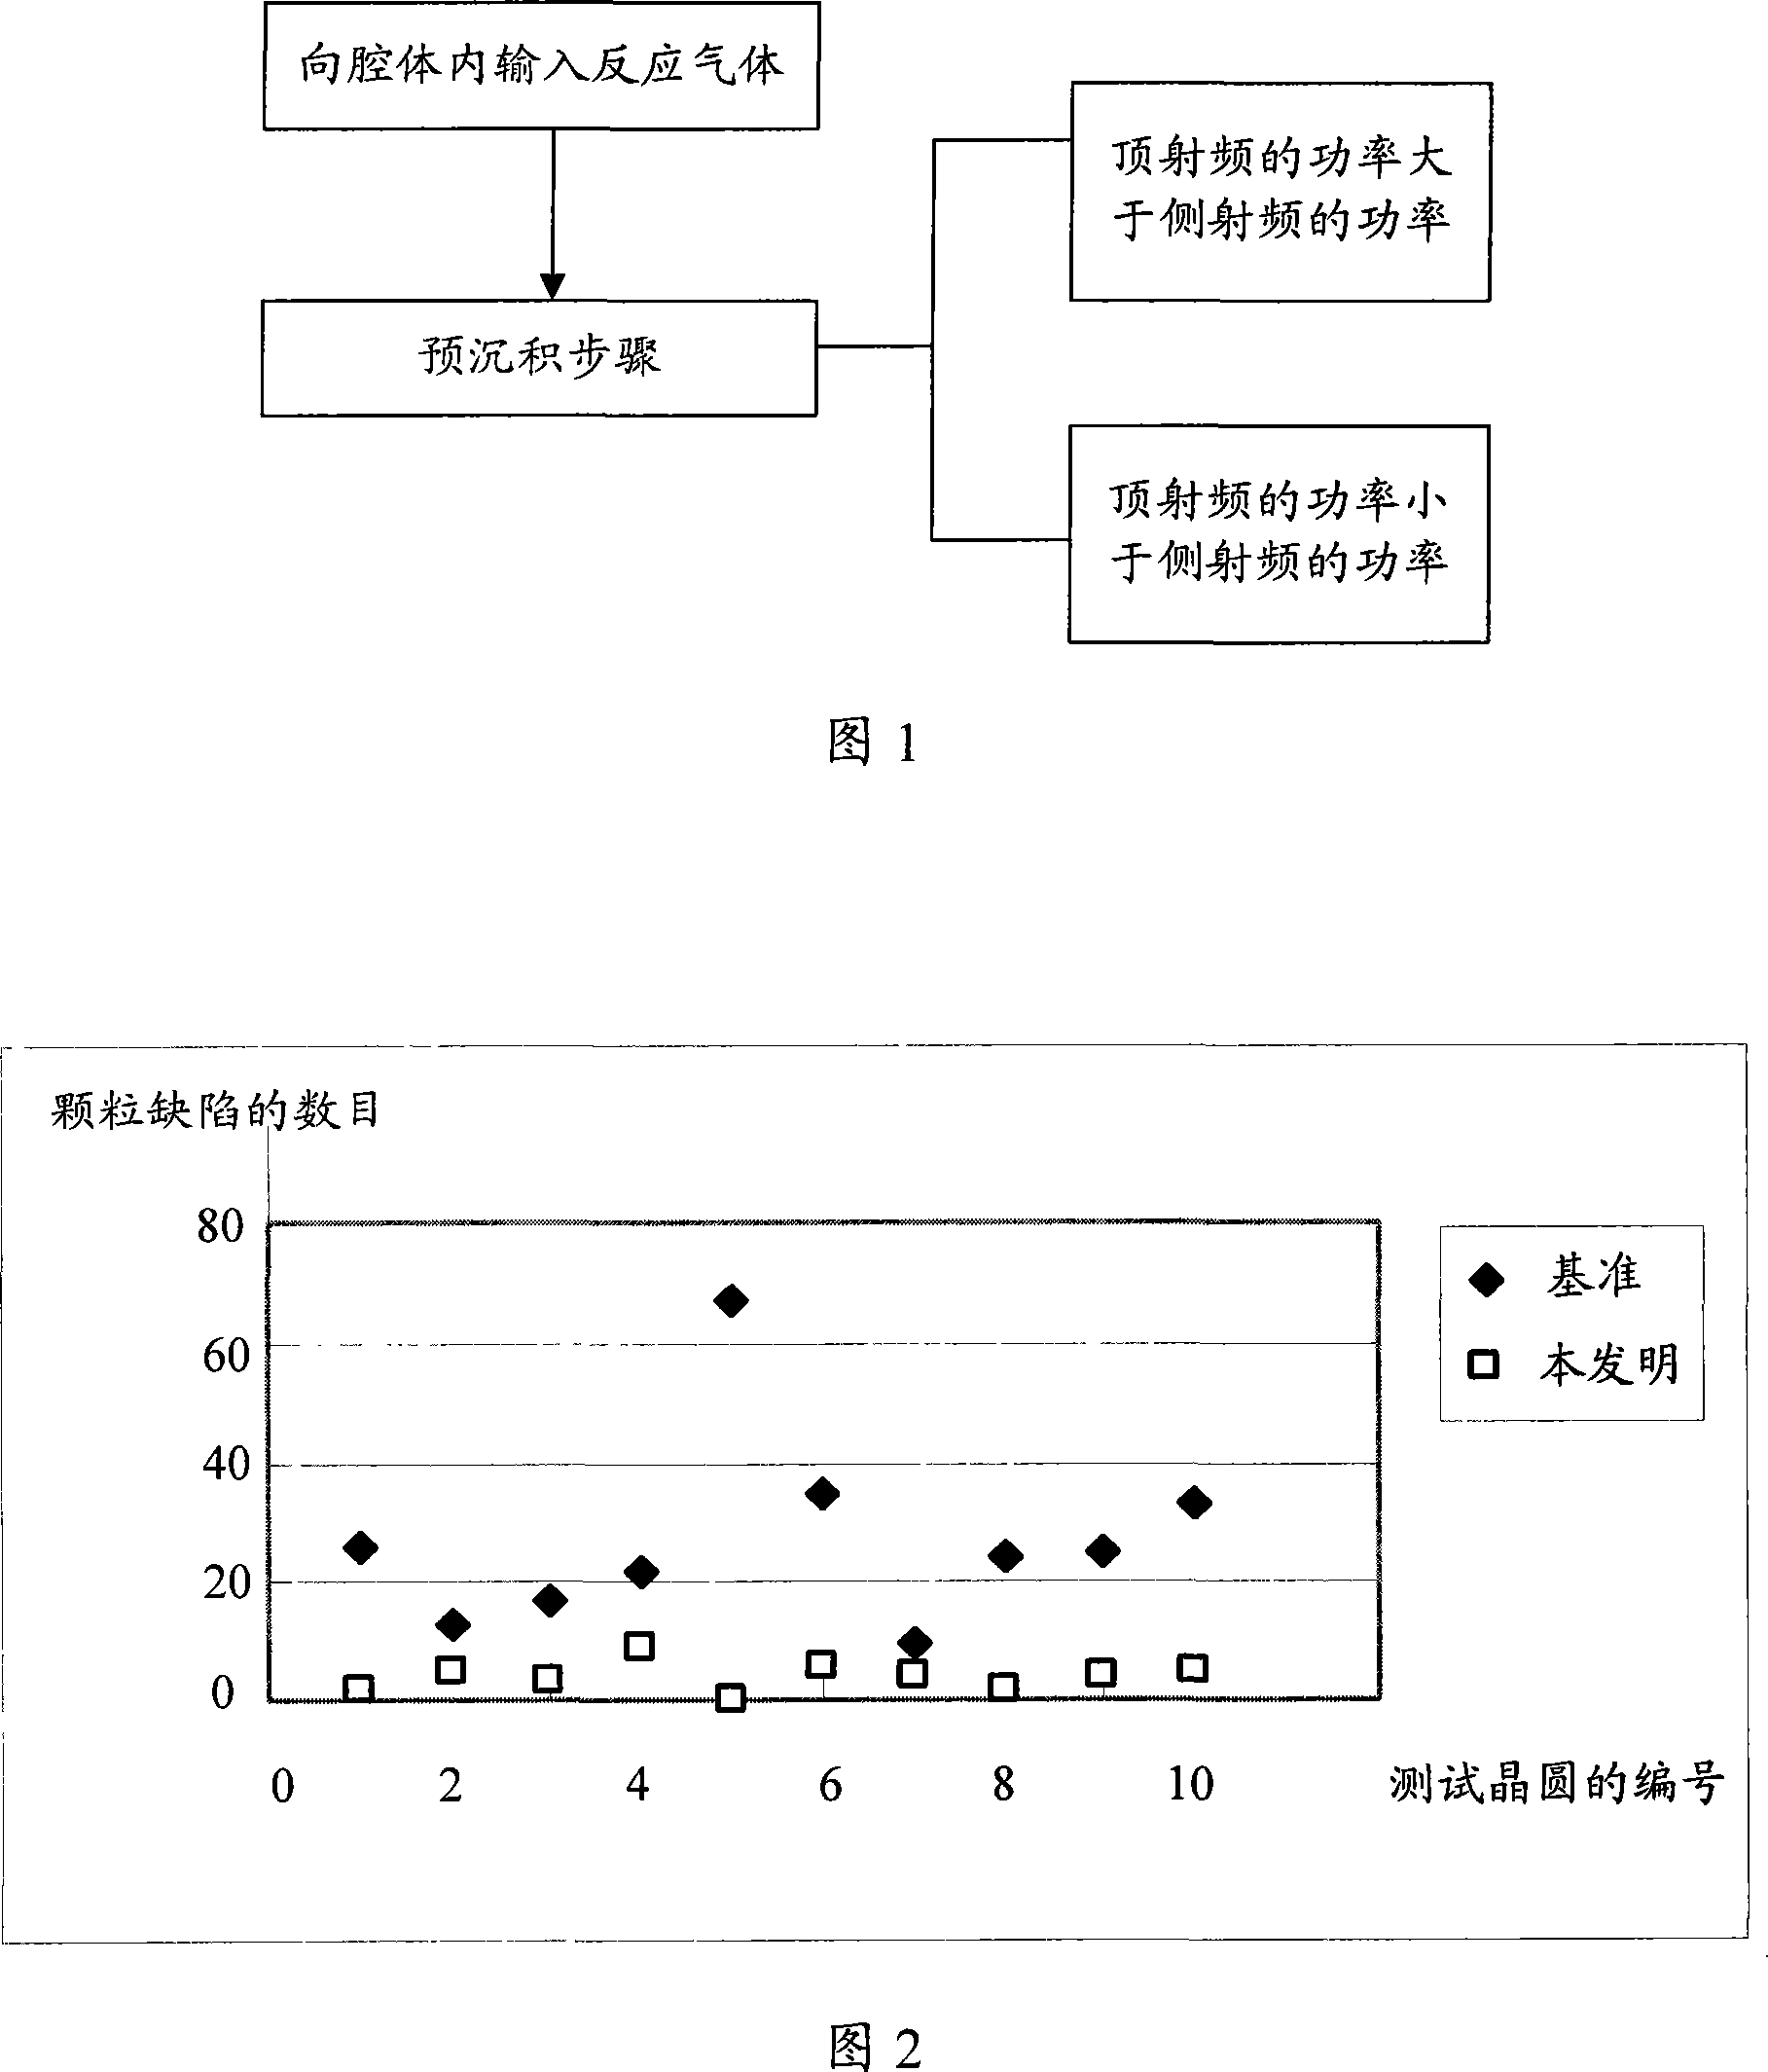 Pre-deposition method for forming protection film in chamber